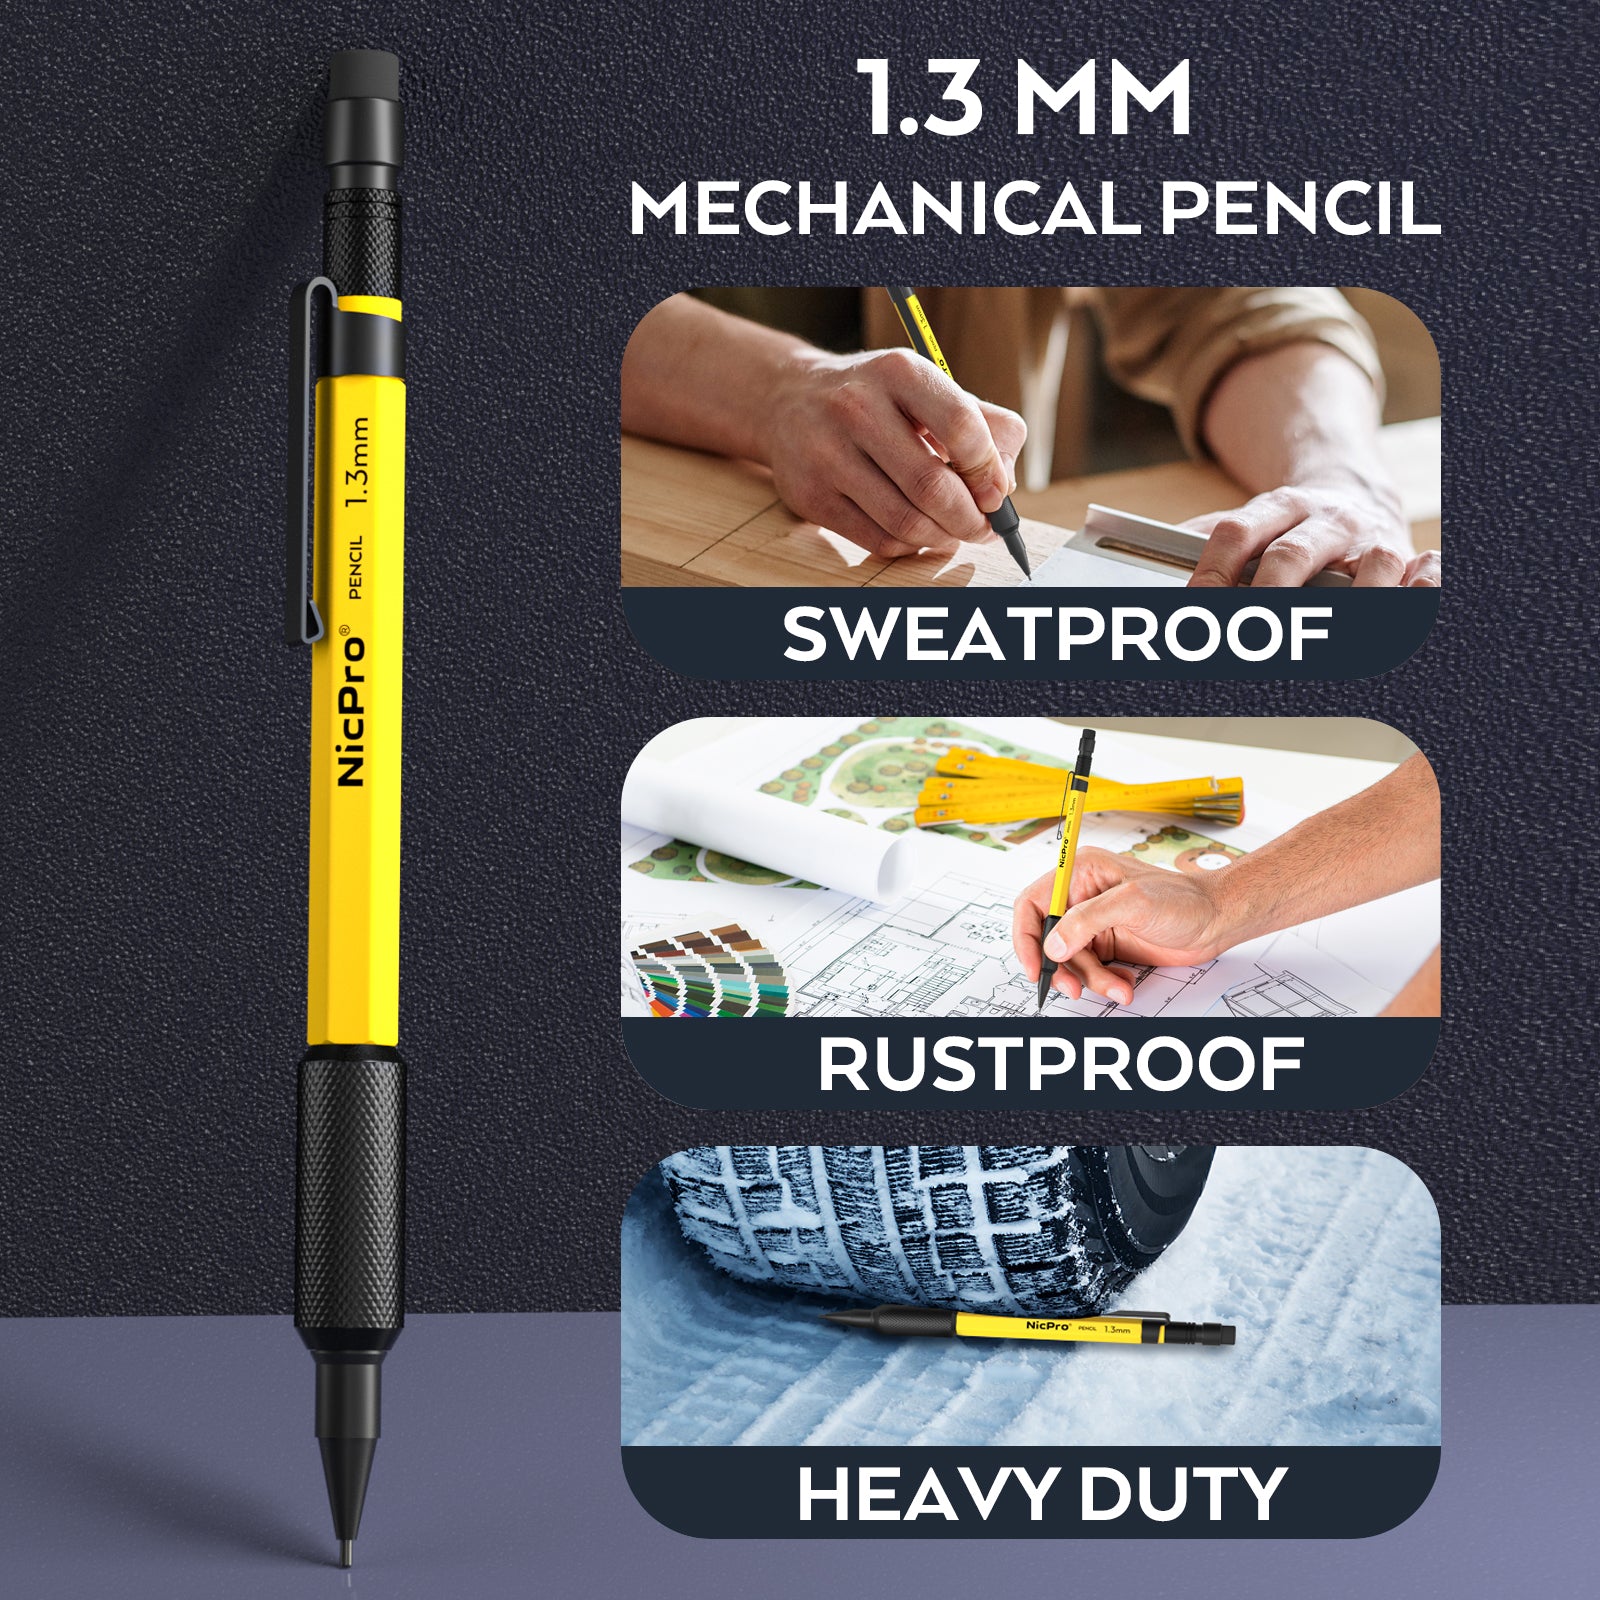 Nicpro 1.3 mm Mechanical Pencils Set with 12 Lead Refill, Eraser - Weatherproof Metal Barrel, Heavy Duty Carpenter Pencil for Outdoor Marking Drafting Drawing Sketching Woodworking - with Case